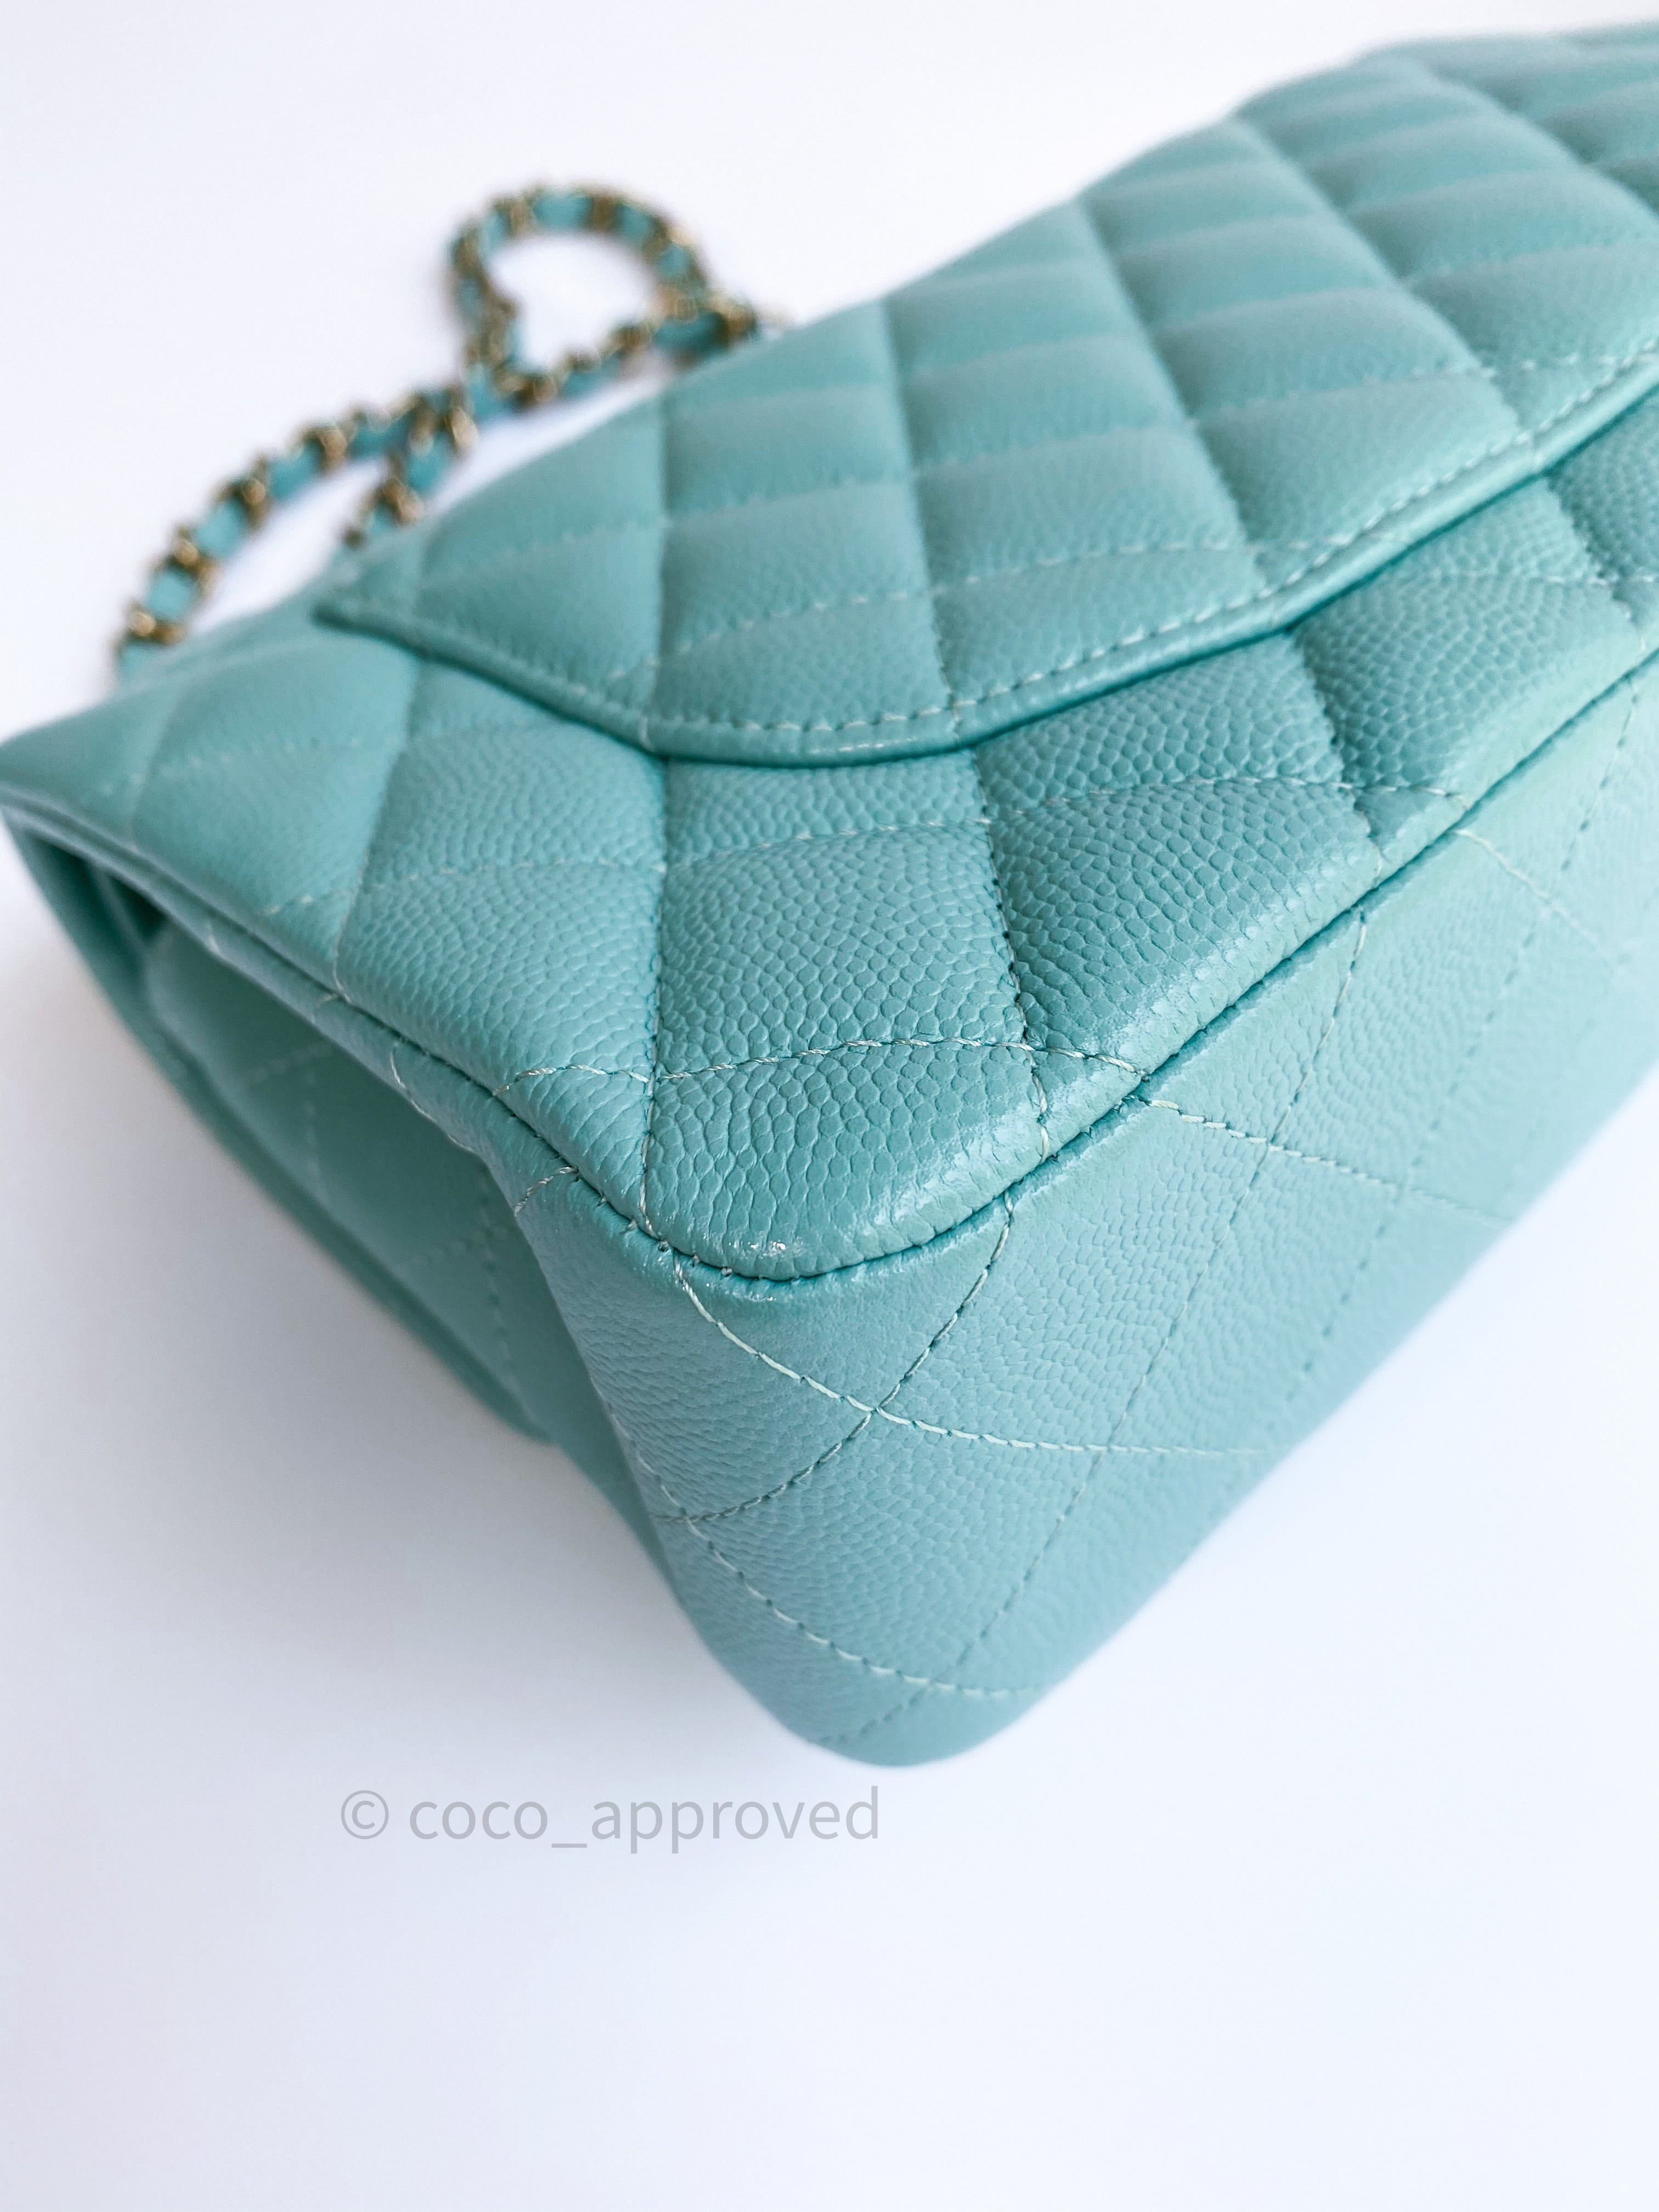 CHANEL Small Classic Double Flap Bag in 19C Tiffany Blue Lambskin